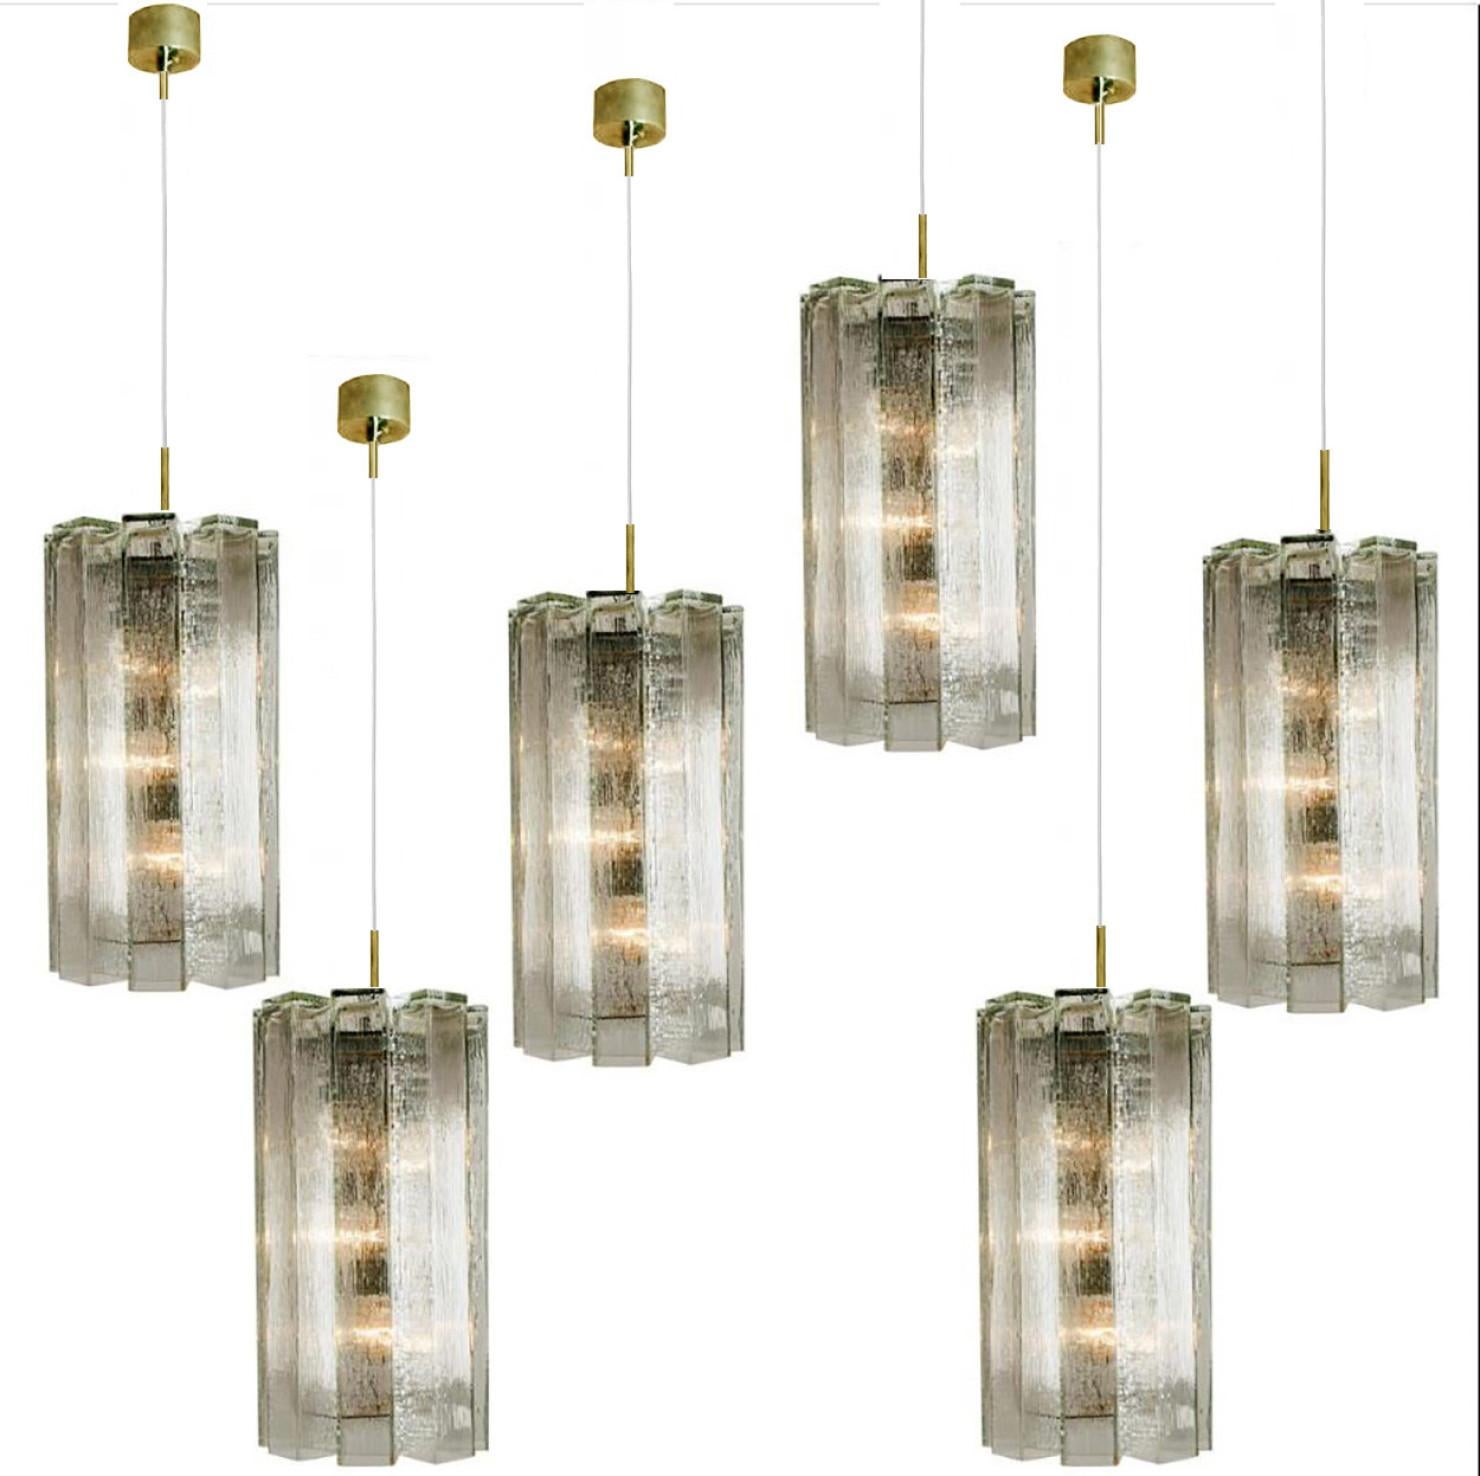 1 of the of the 6 Cascade hand blown lamps in a pendant design, model 4308, manufactured by Doria. It is suitable especially for high ceilings and lounge areas. The 8 square glass tubes create a beautiful lighting effect.

Minimalistic design